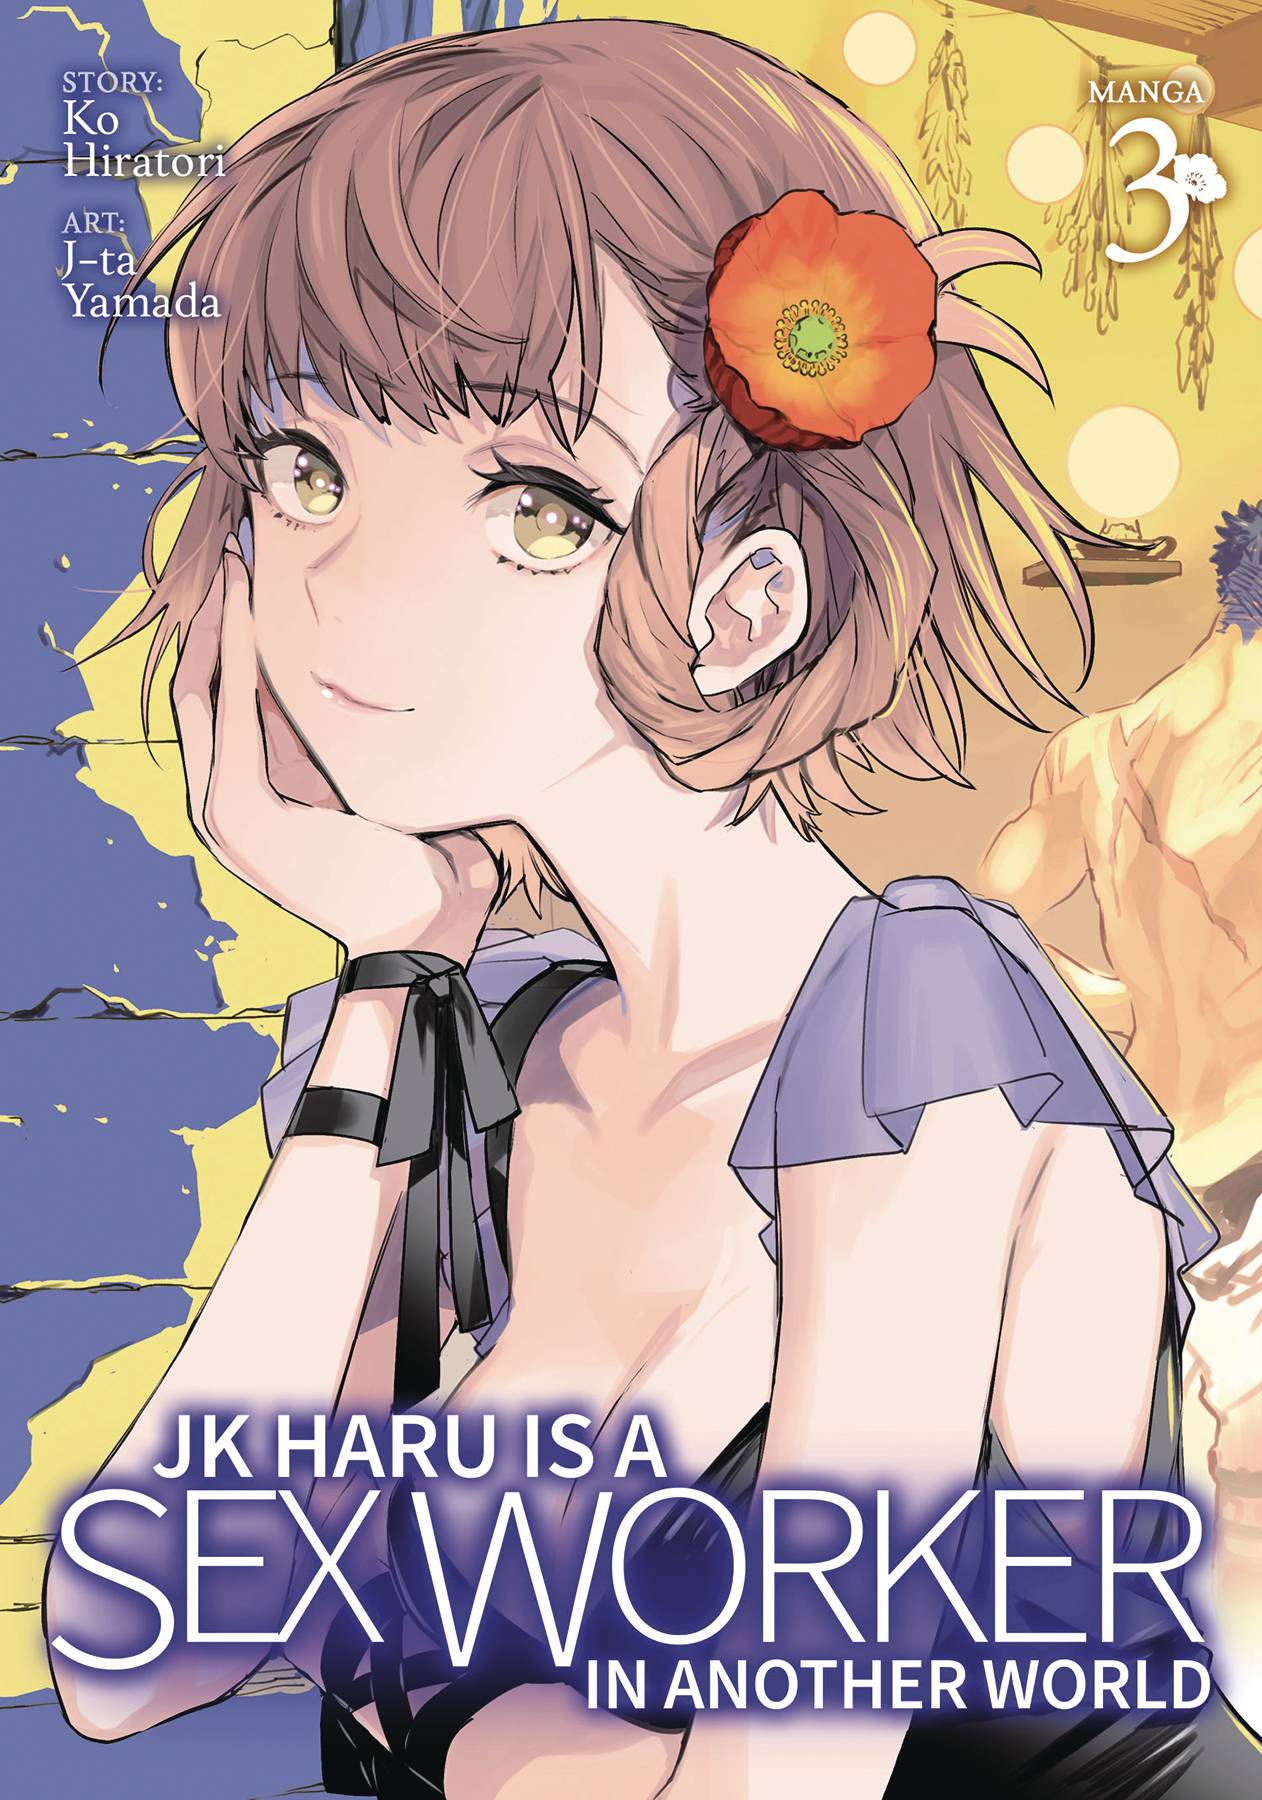 Jk haru is a sex worker in another world free ipods on ebay